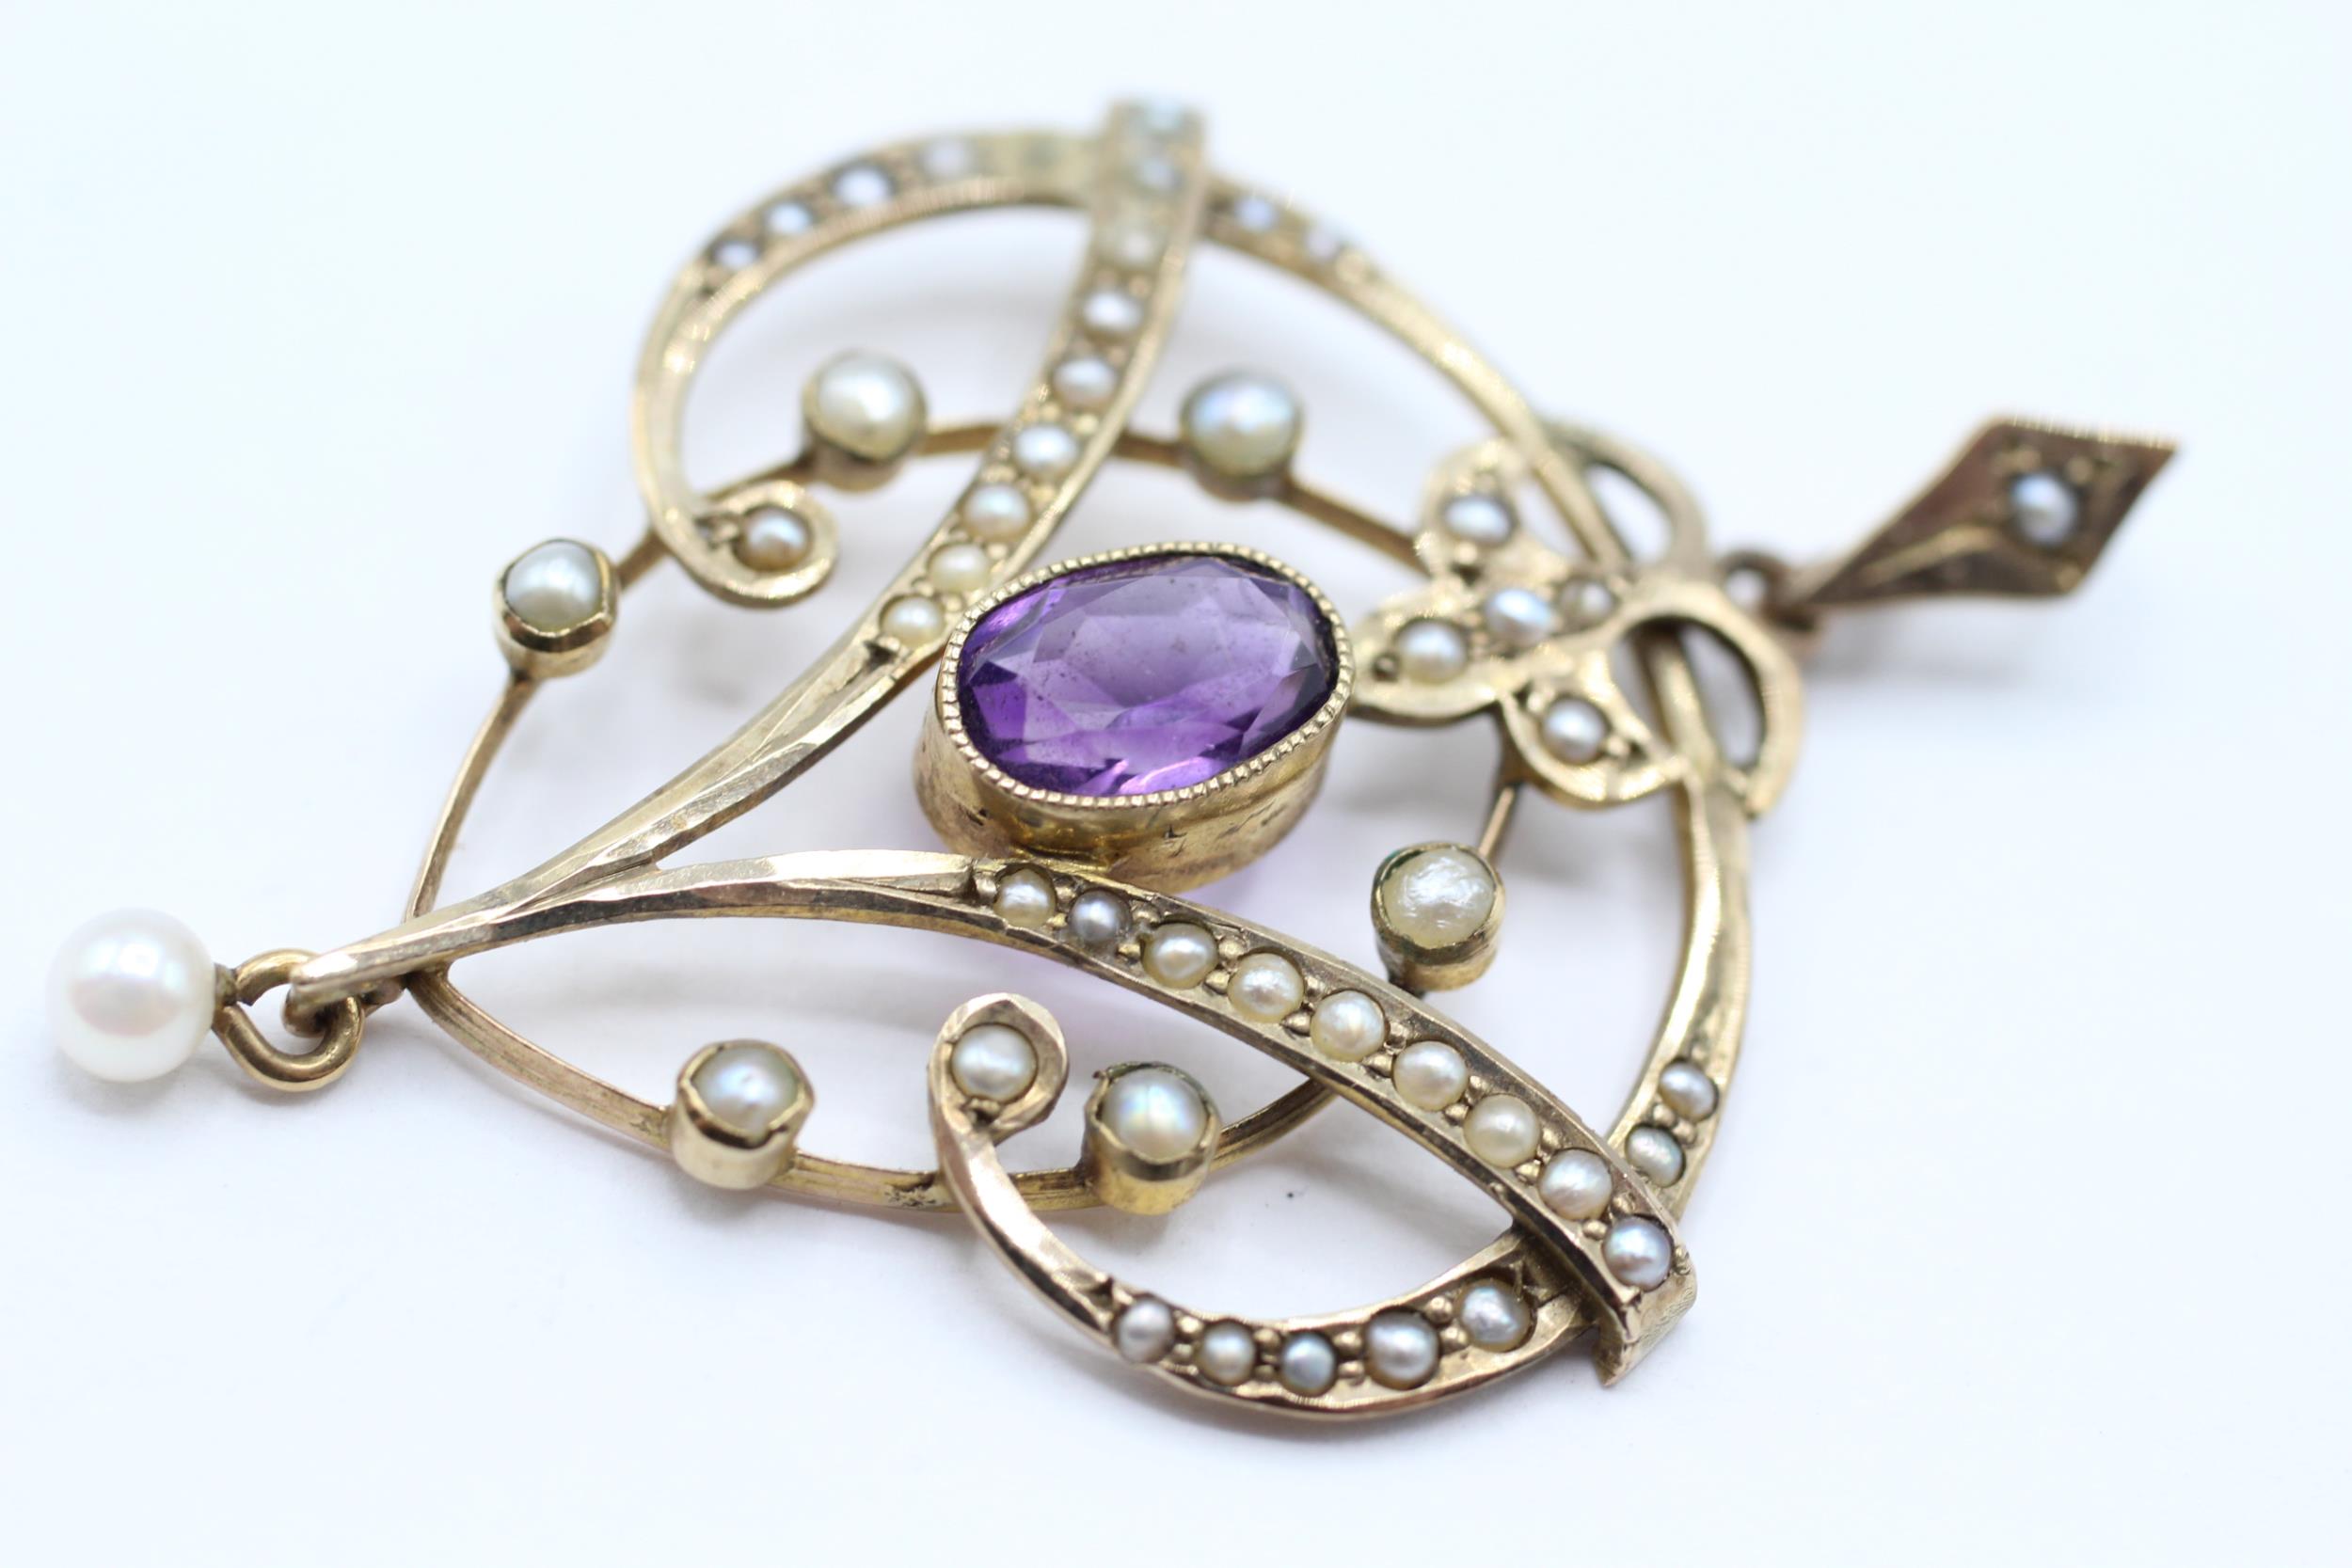 9ct gold Edwardian amethyst & seed pearl pendant with a drop cultured pearl 3.3 g - Image 3 of 5